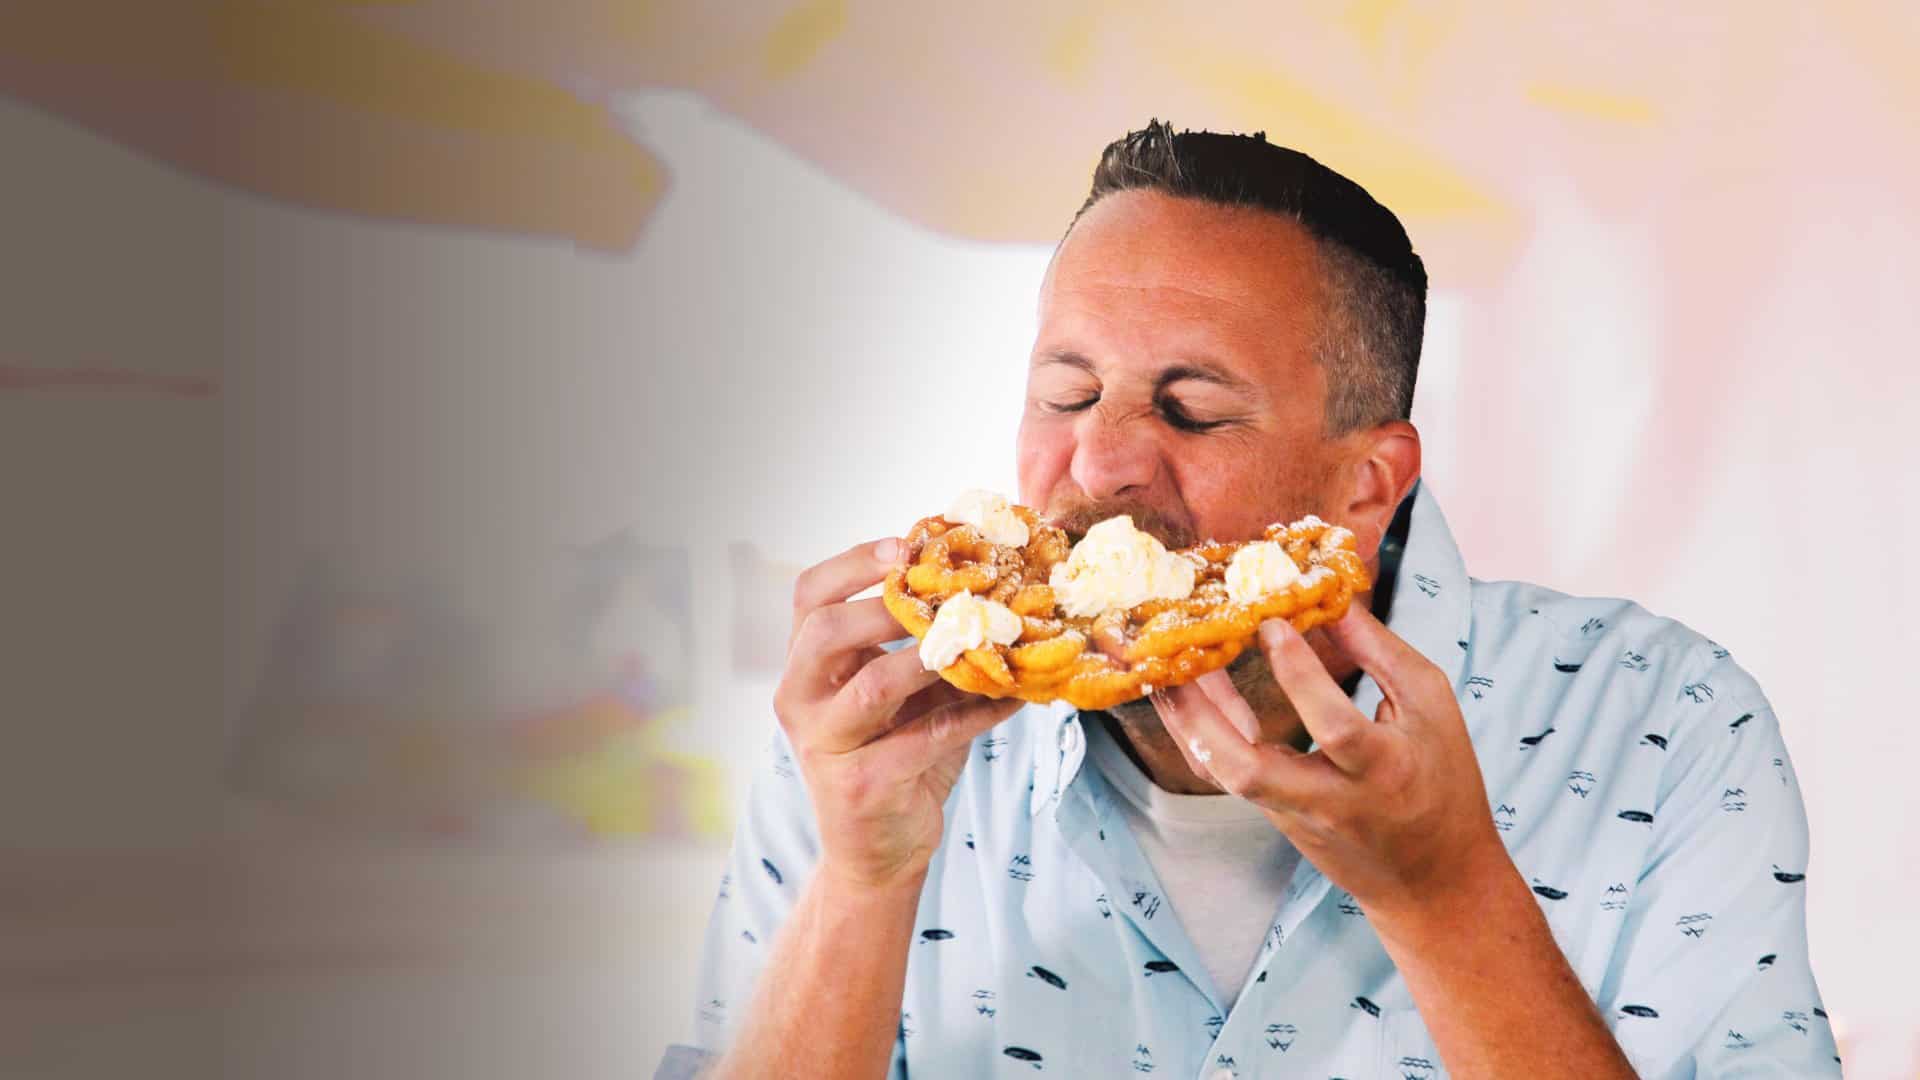 Noah Cappe in the show, Carnival Eats (Credits: Food Network)